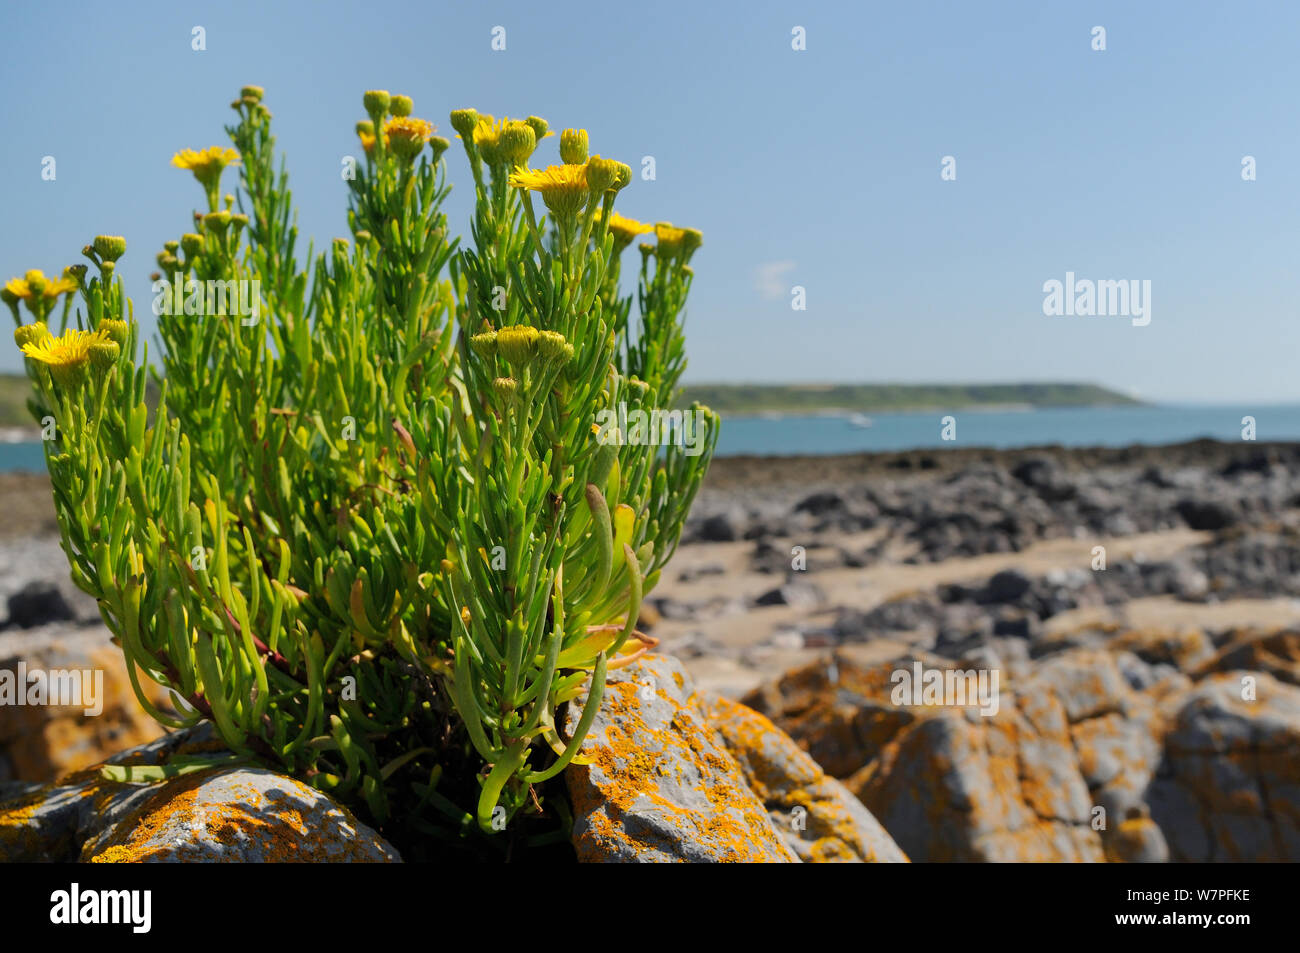 Golden samphire (Inula crithmoides) clump flowering on limestone rock outcrop just above the high tide line, Port Eynon, Gower Peninsula, Wales, UK, July. Stock Photo